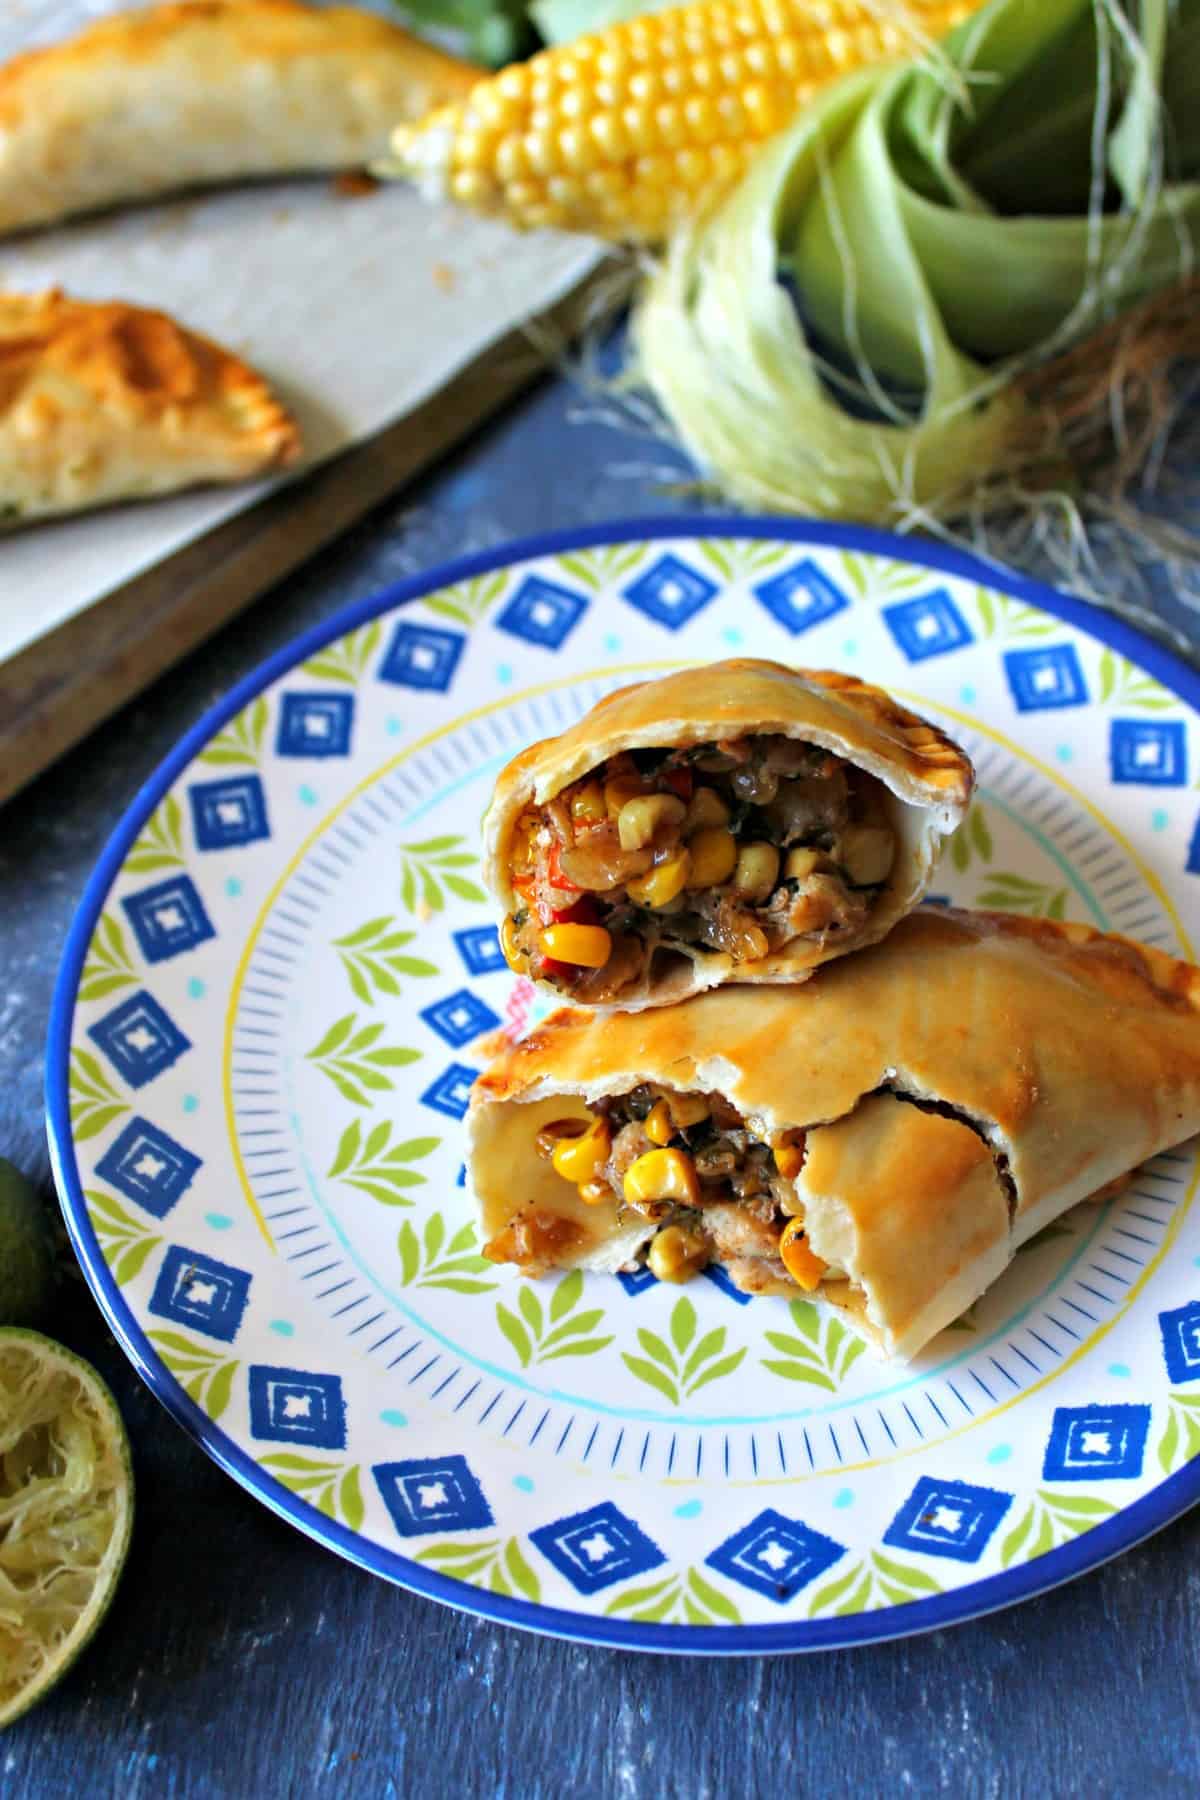 Need a new way to use up that summer sweet corn? These Baked Crab and Corn Empanadas are a handheld savory snack that's bursting with flavor and fun to eat! Baked instead of fried, they're a lightened up version of a classic Latin American bite.  